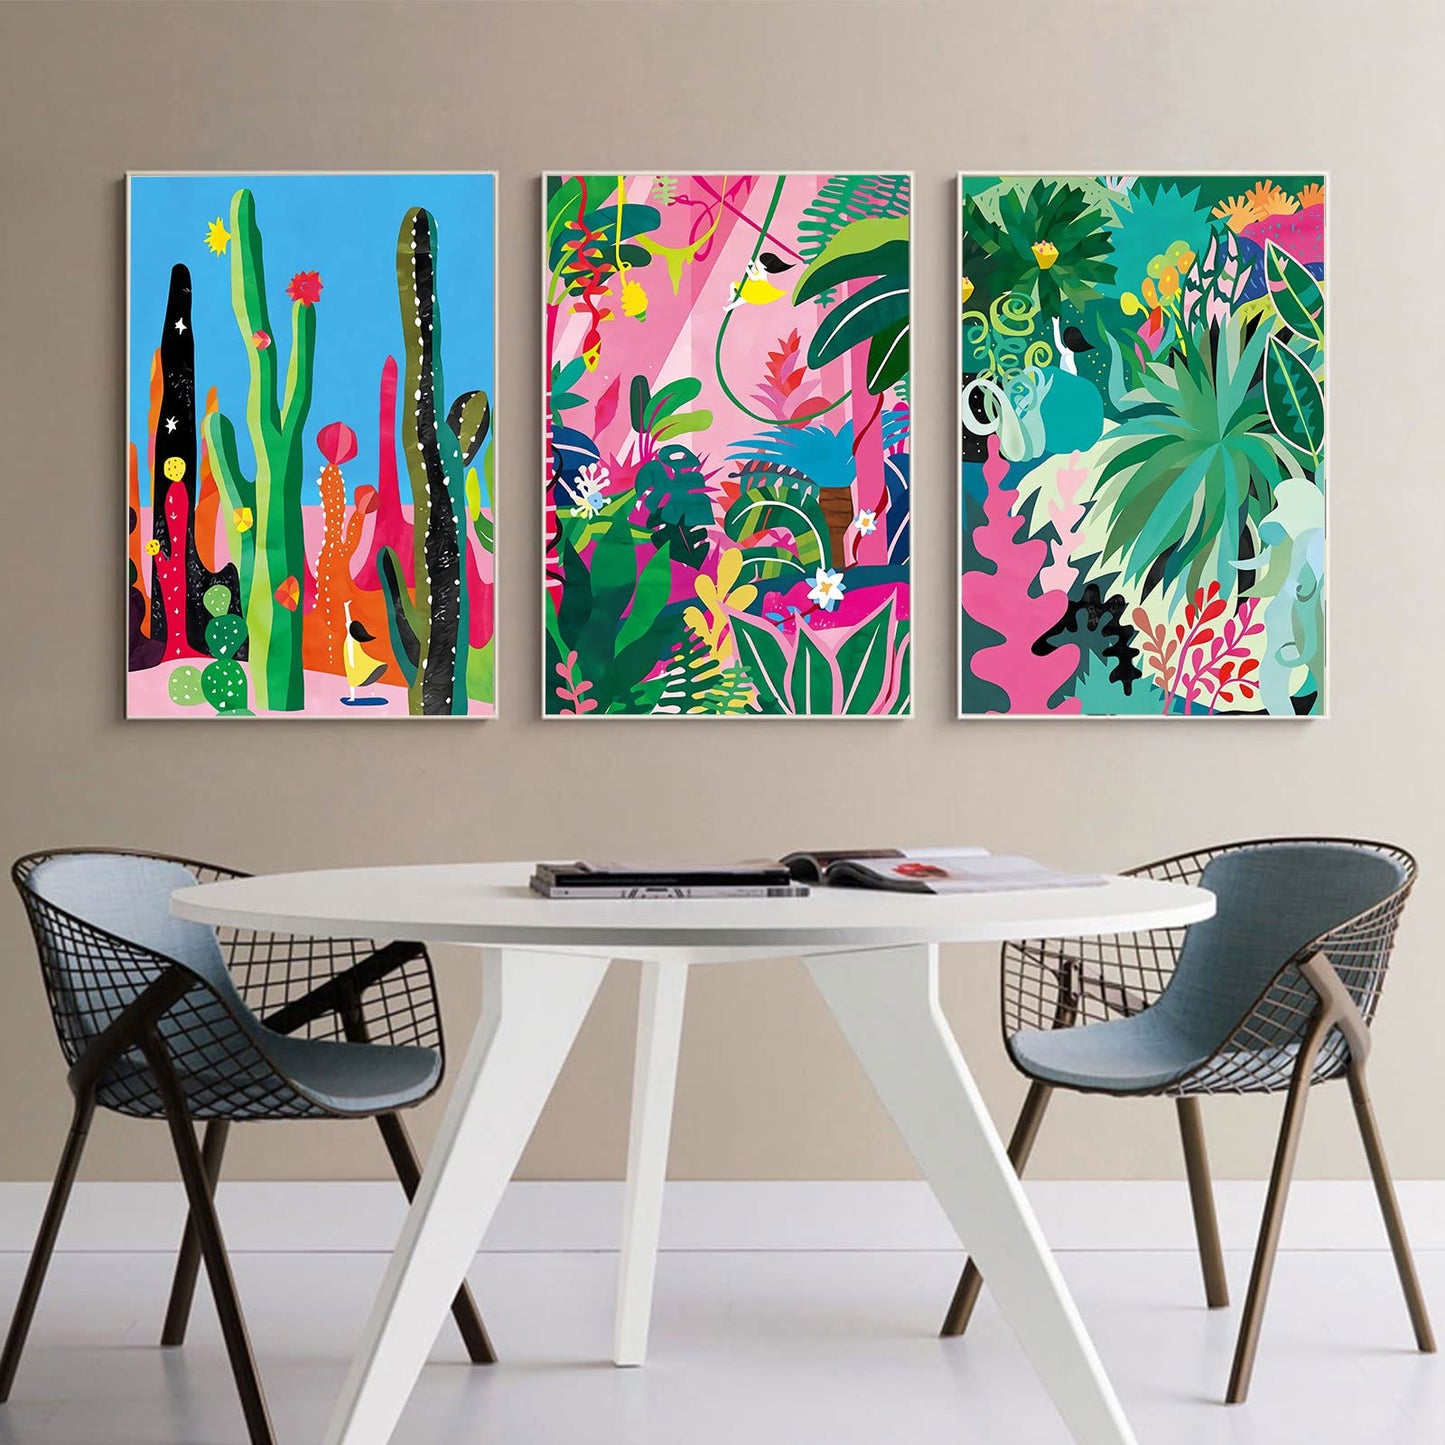 3 Pieces Green Fresh Leaf Monstera Plant Wall Art Canvas Painting Nordic Posters And Prints Wall Pictures for Living Room Bedroom Decor 16x24 Inch No Frame (Botanical Garden Wall Art, 12x16in x 3)